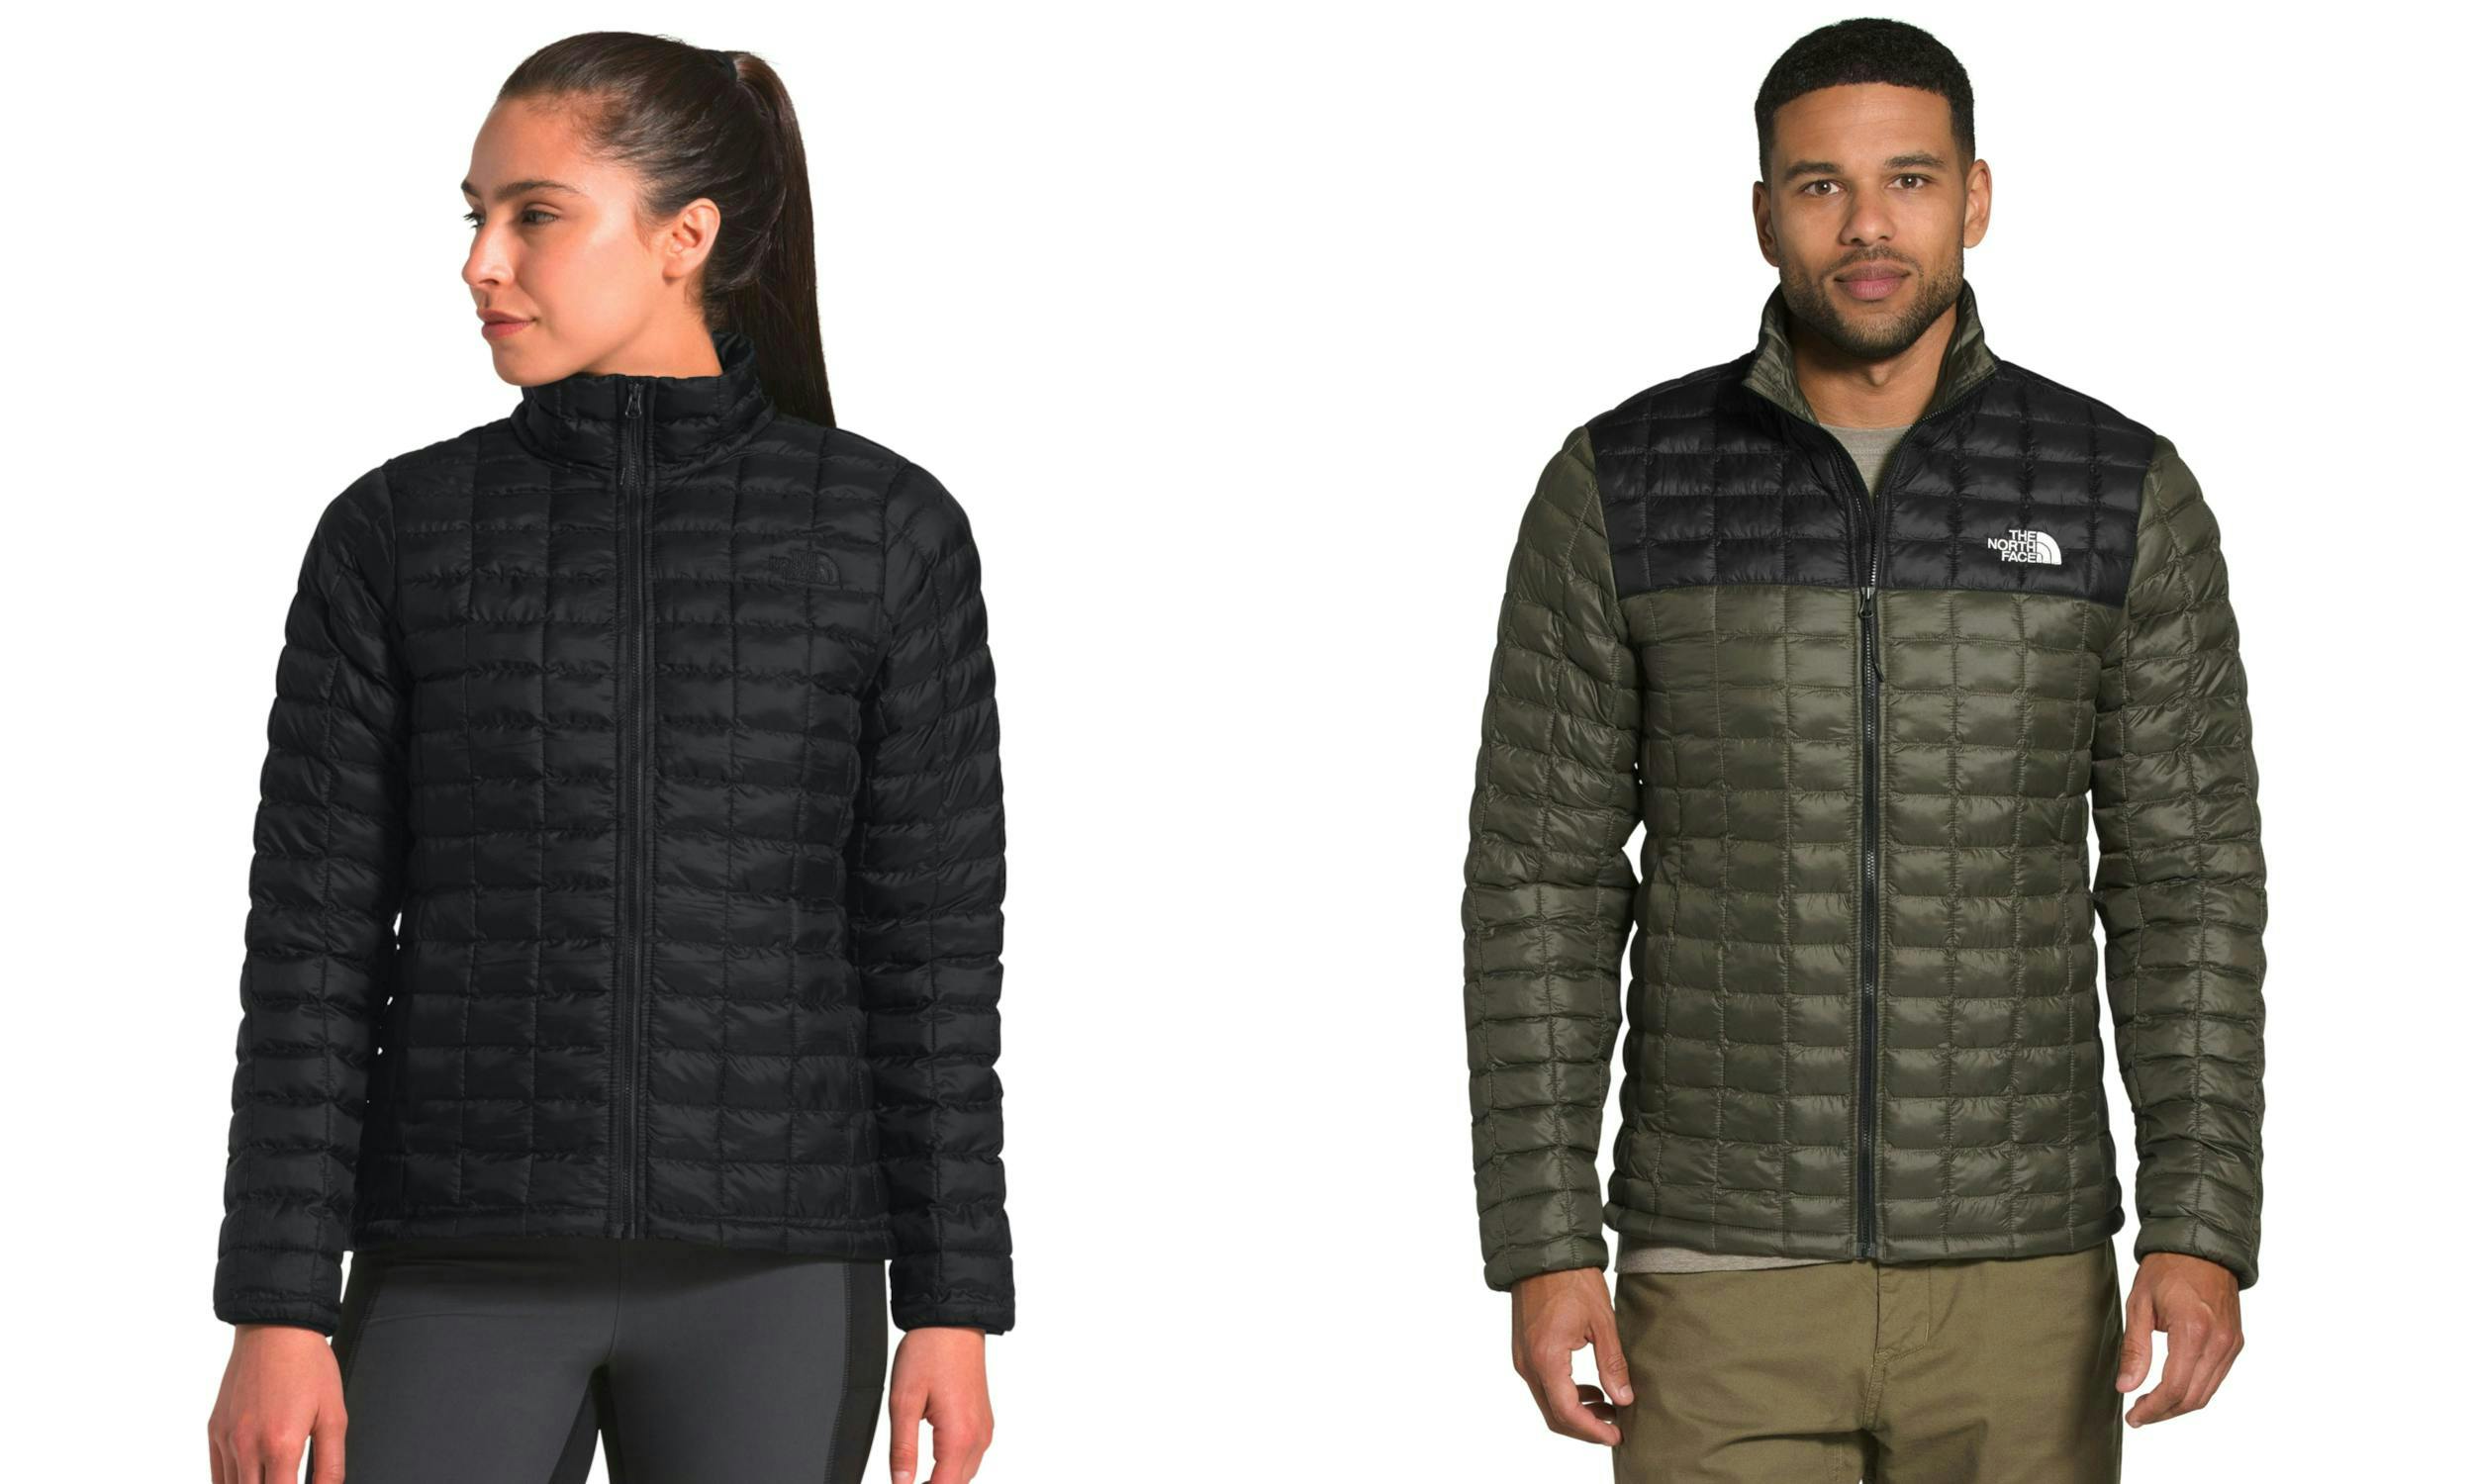 Thermoball jackets in men's and women's versions